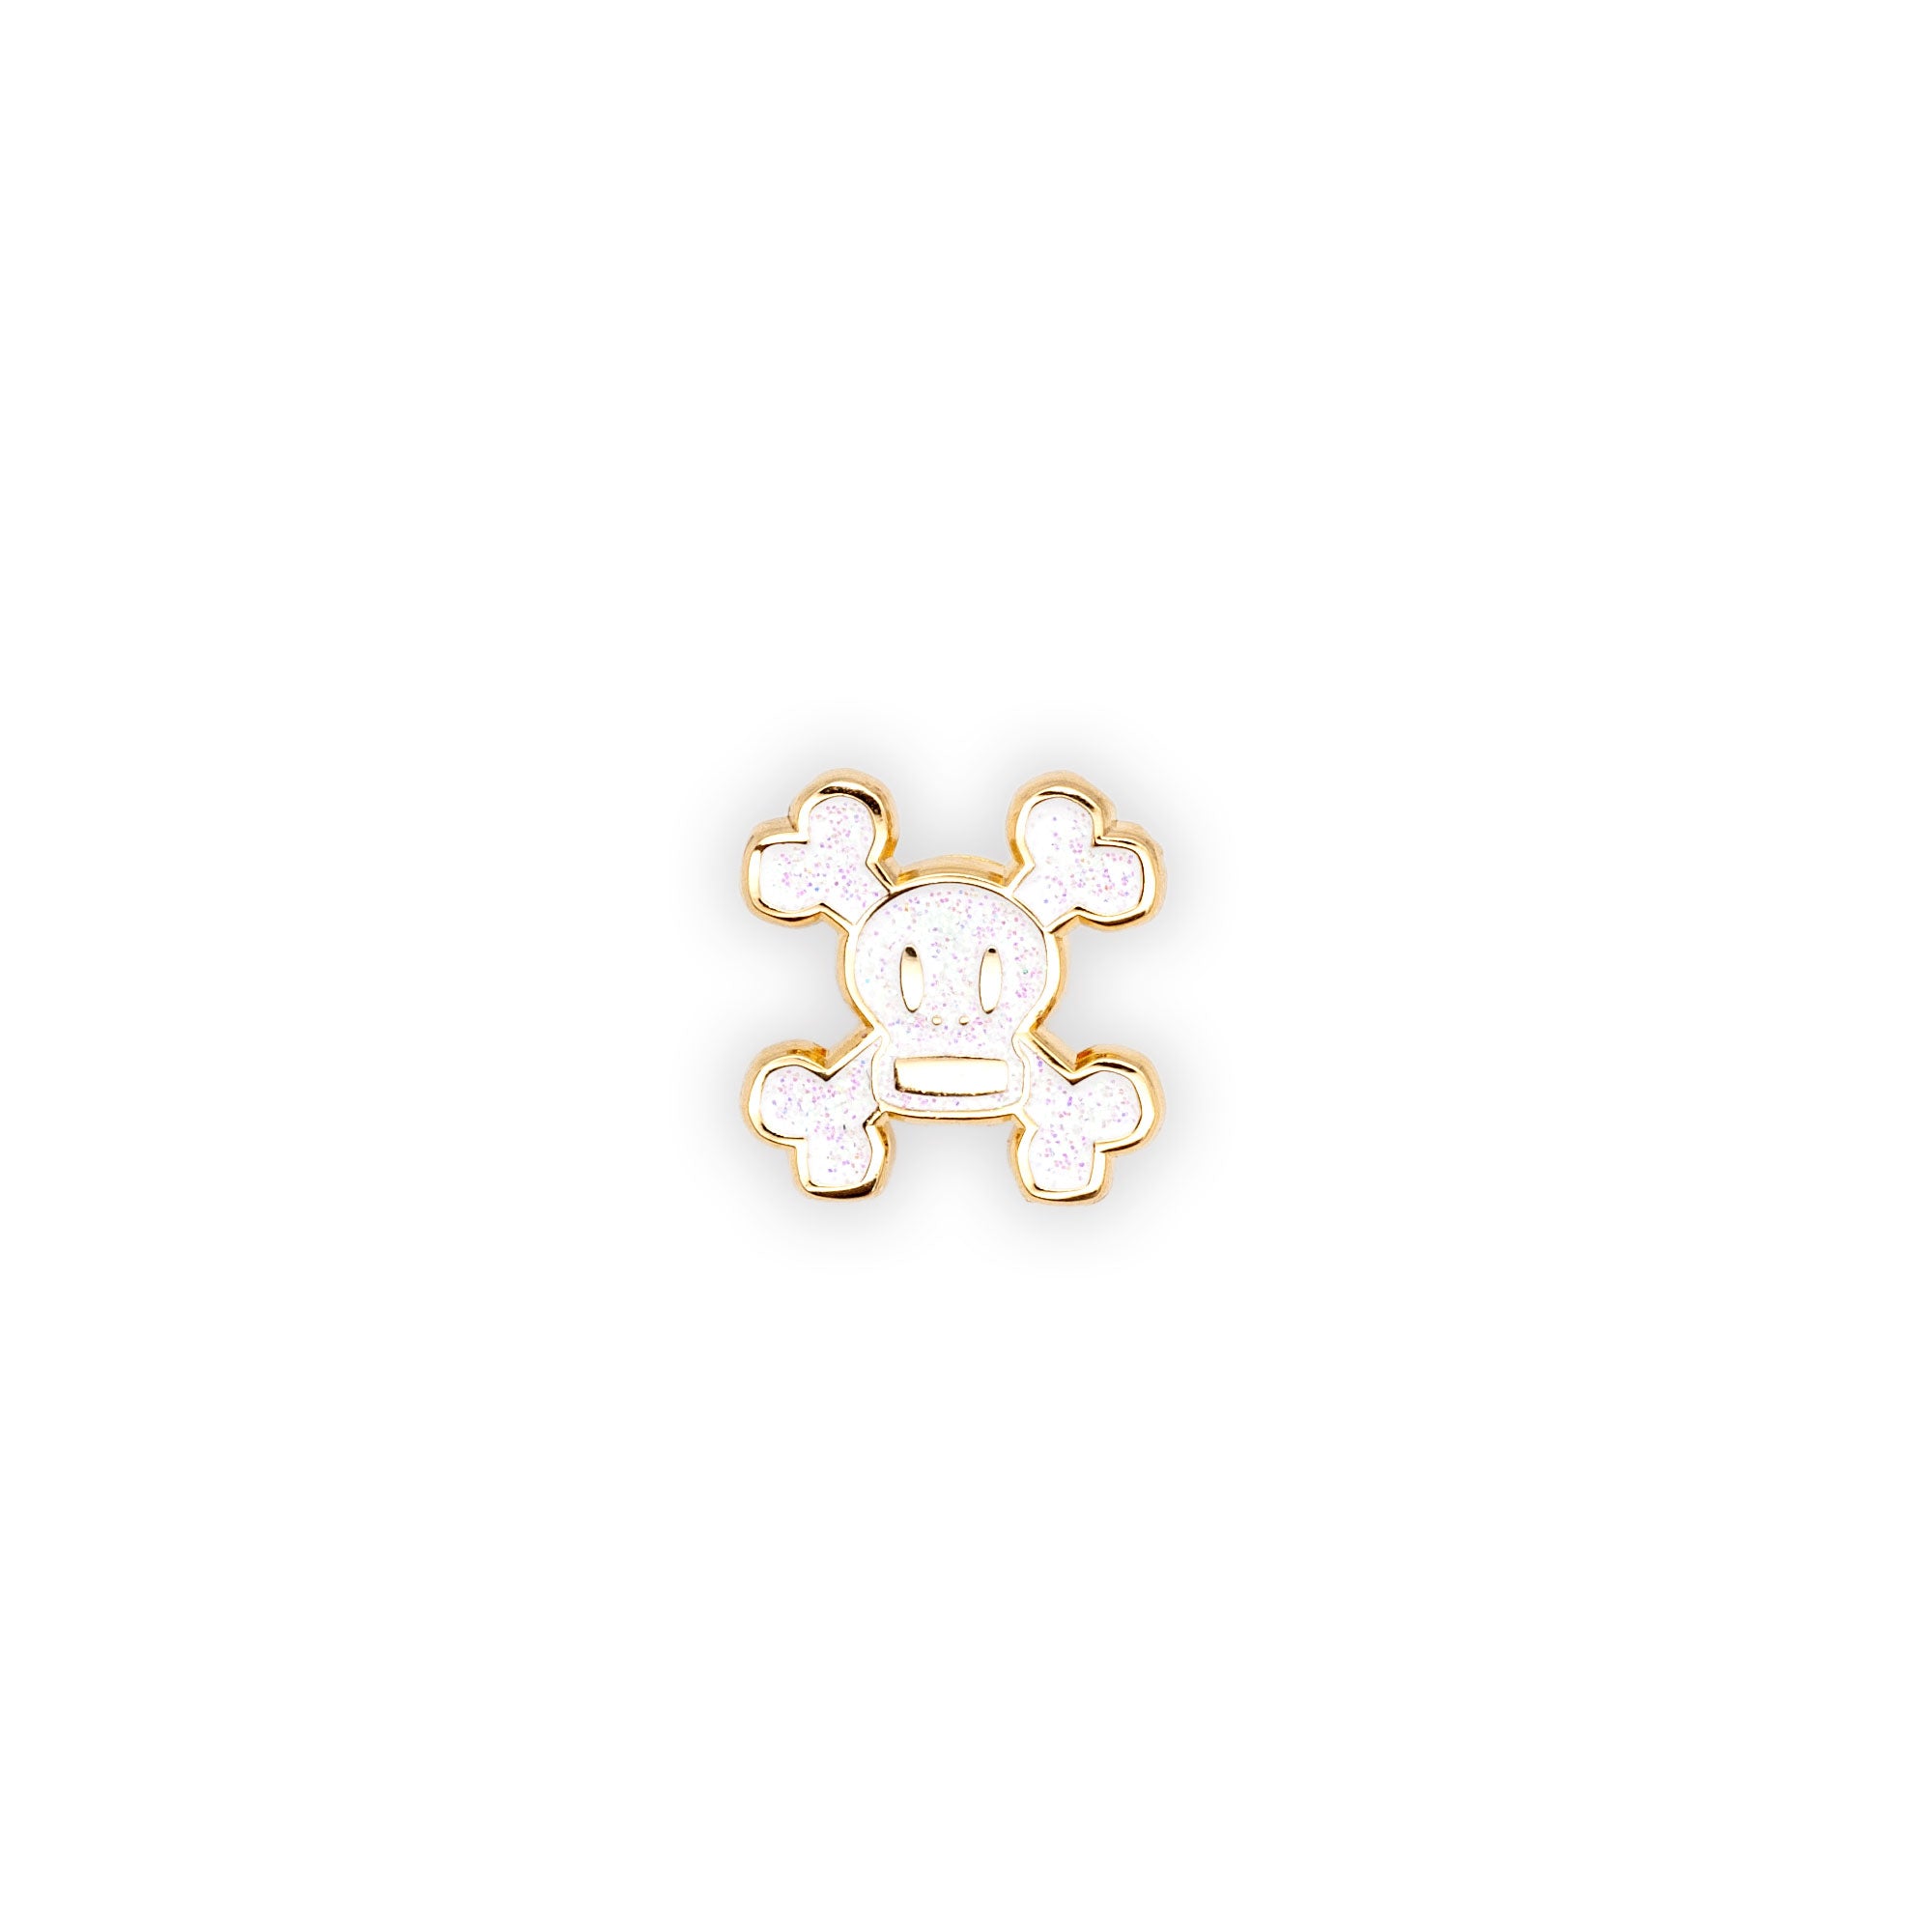 Skurvy limited edition pin is gold plated soft enamel with white glitter fill.  shot on a white background.